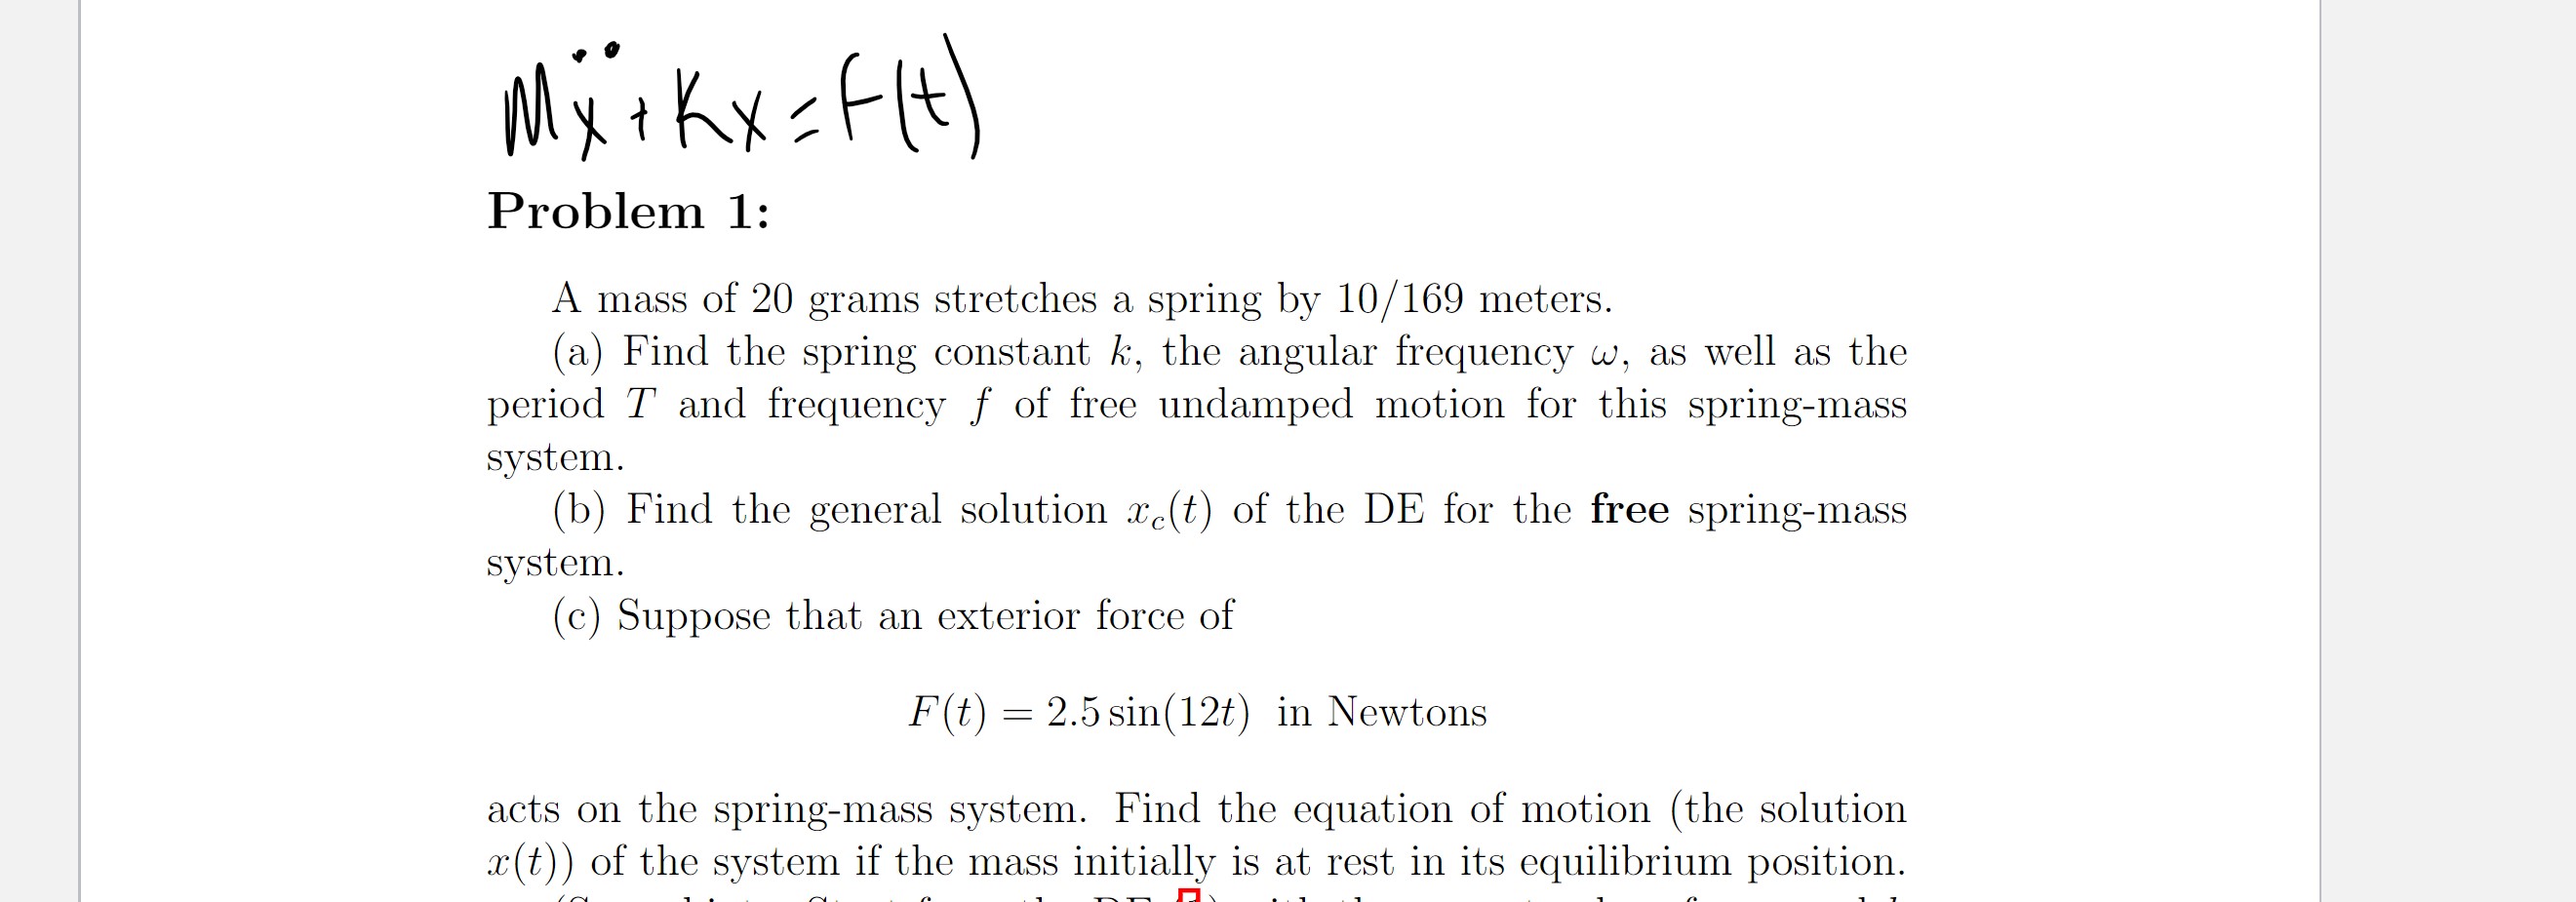 MärkxsfH)
Problem 1:
A mass of 20 grams stretches a spring by 10/169 meters.
(a) Find the spring constant k, the angular frequency w, as well as the
period T and frequency f of free undamped motion for this spring-mass
system.
(b) Find the general solution x(t) of the DE for the free spring-mass
system.
(c) Suppose that an exterior force of
F(t) = 2.5 sin(12t) in Newtons
acts on the spring-mass system. Find the equation of motion (the solution
x(t)) of the system if the mass initially is at rest in its equilibrium position.
